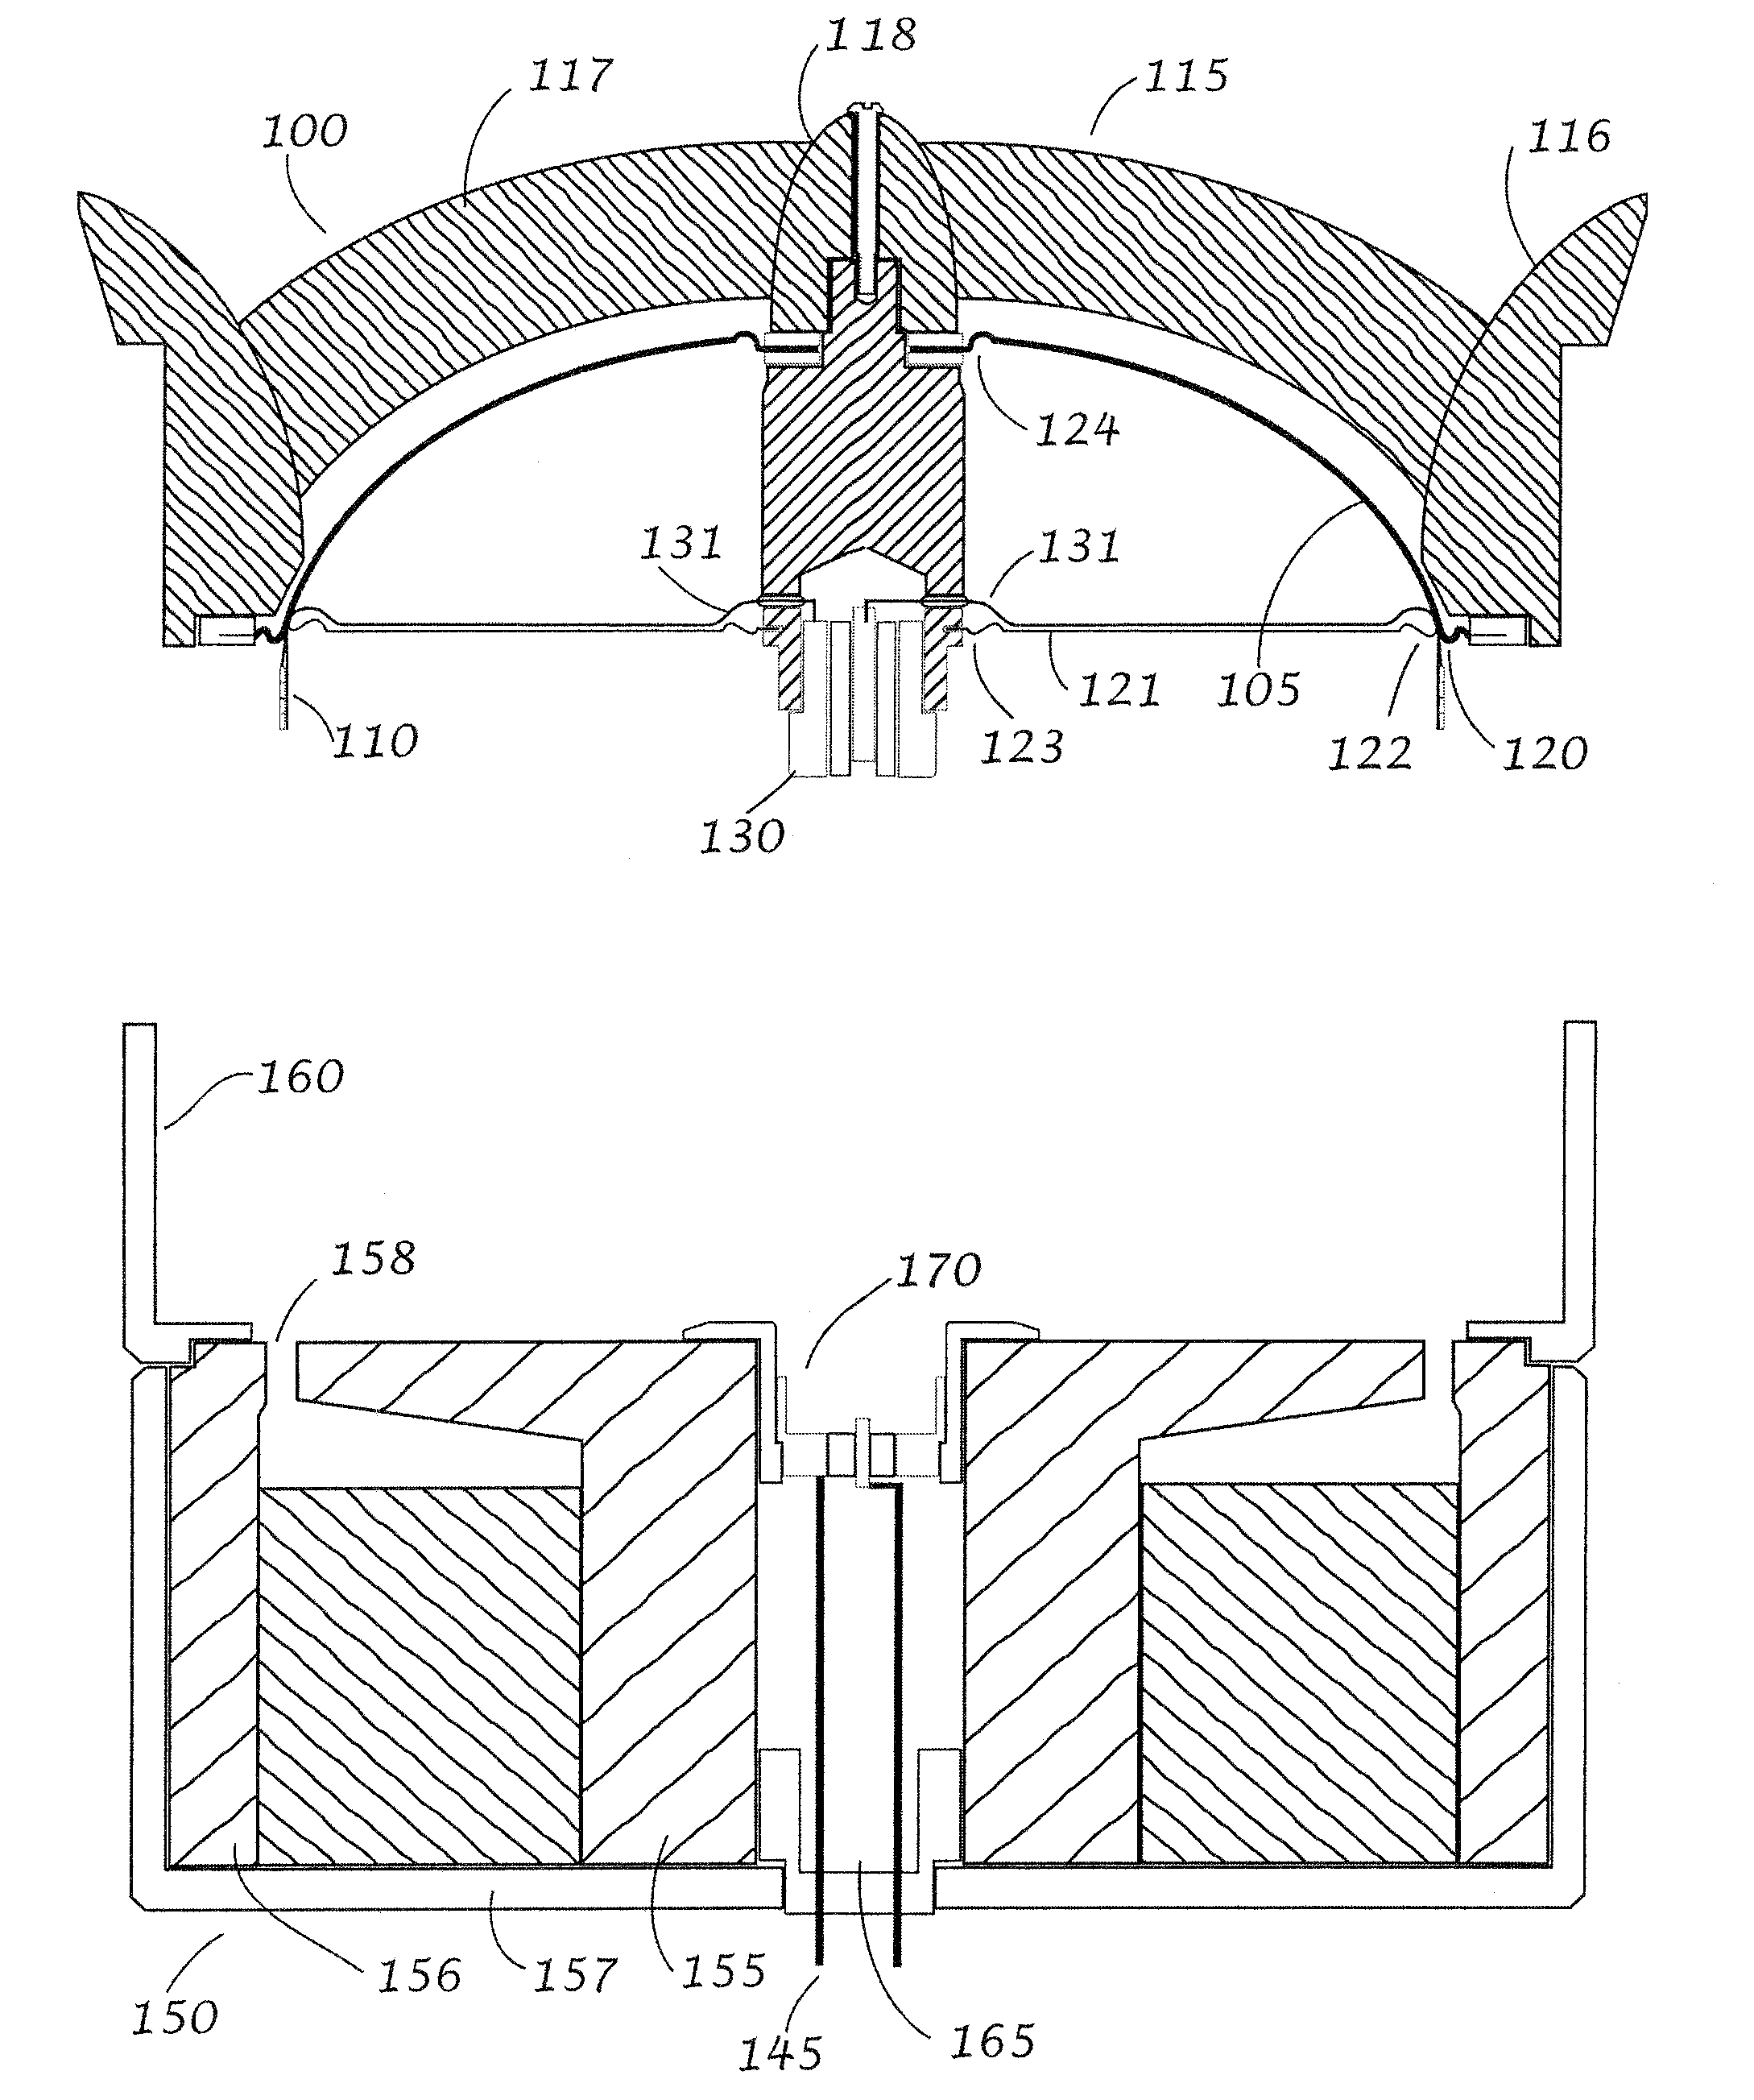 High-frequency diaphragm and voice coil assembly